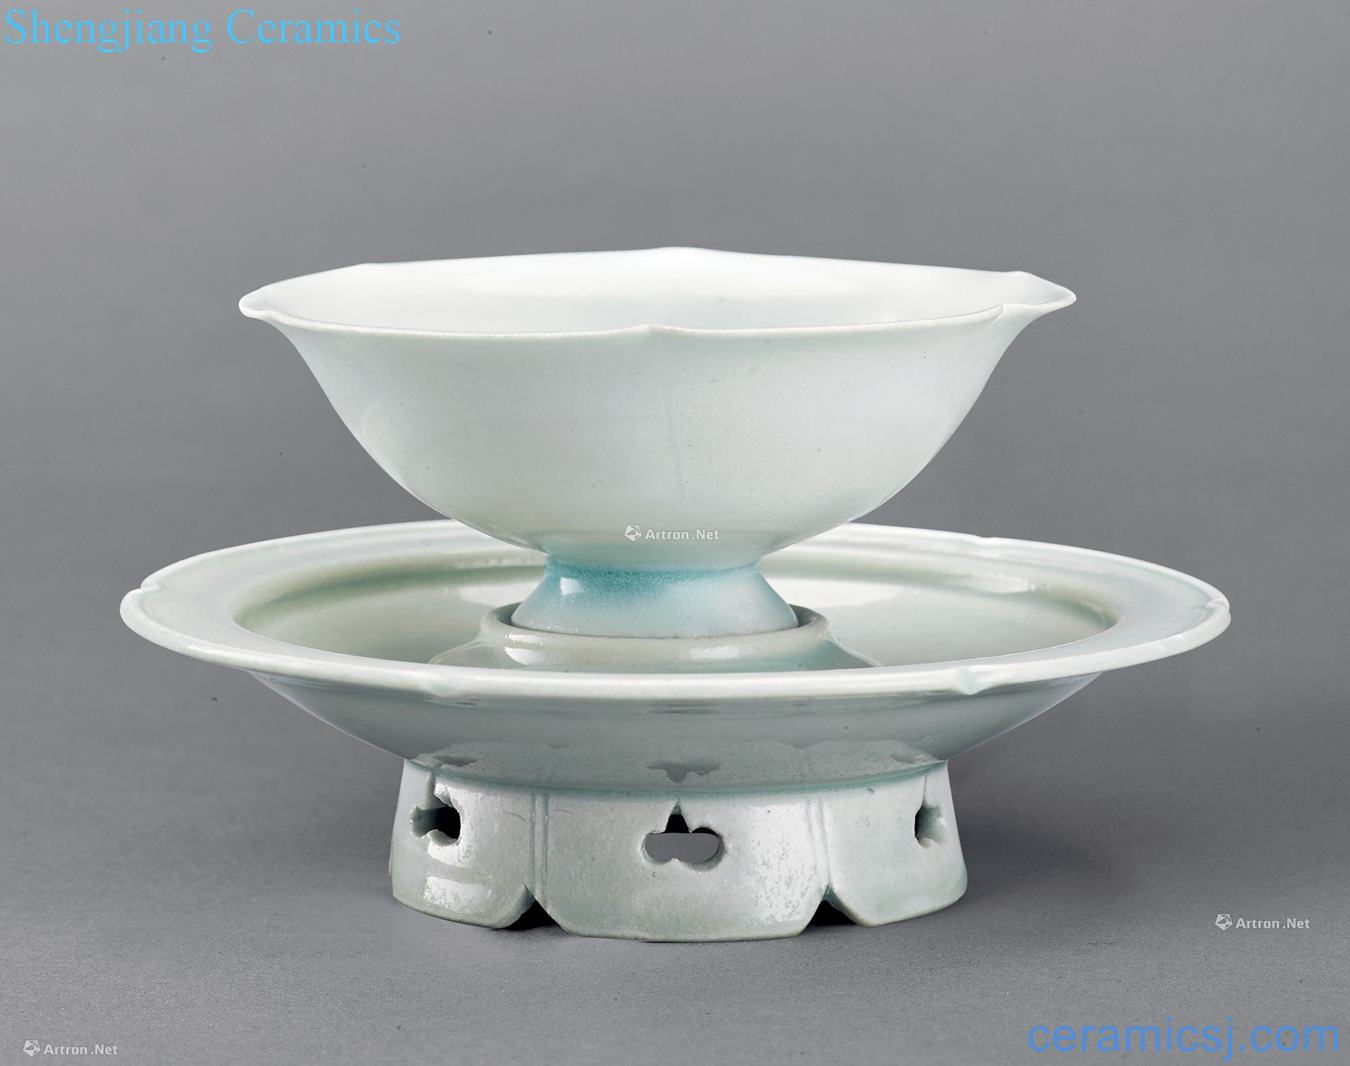 Song green white porcelain footed lamp